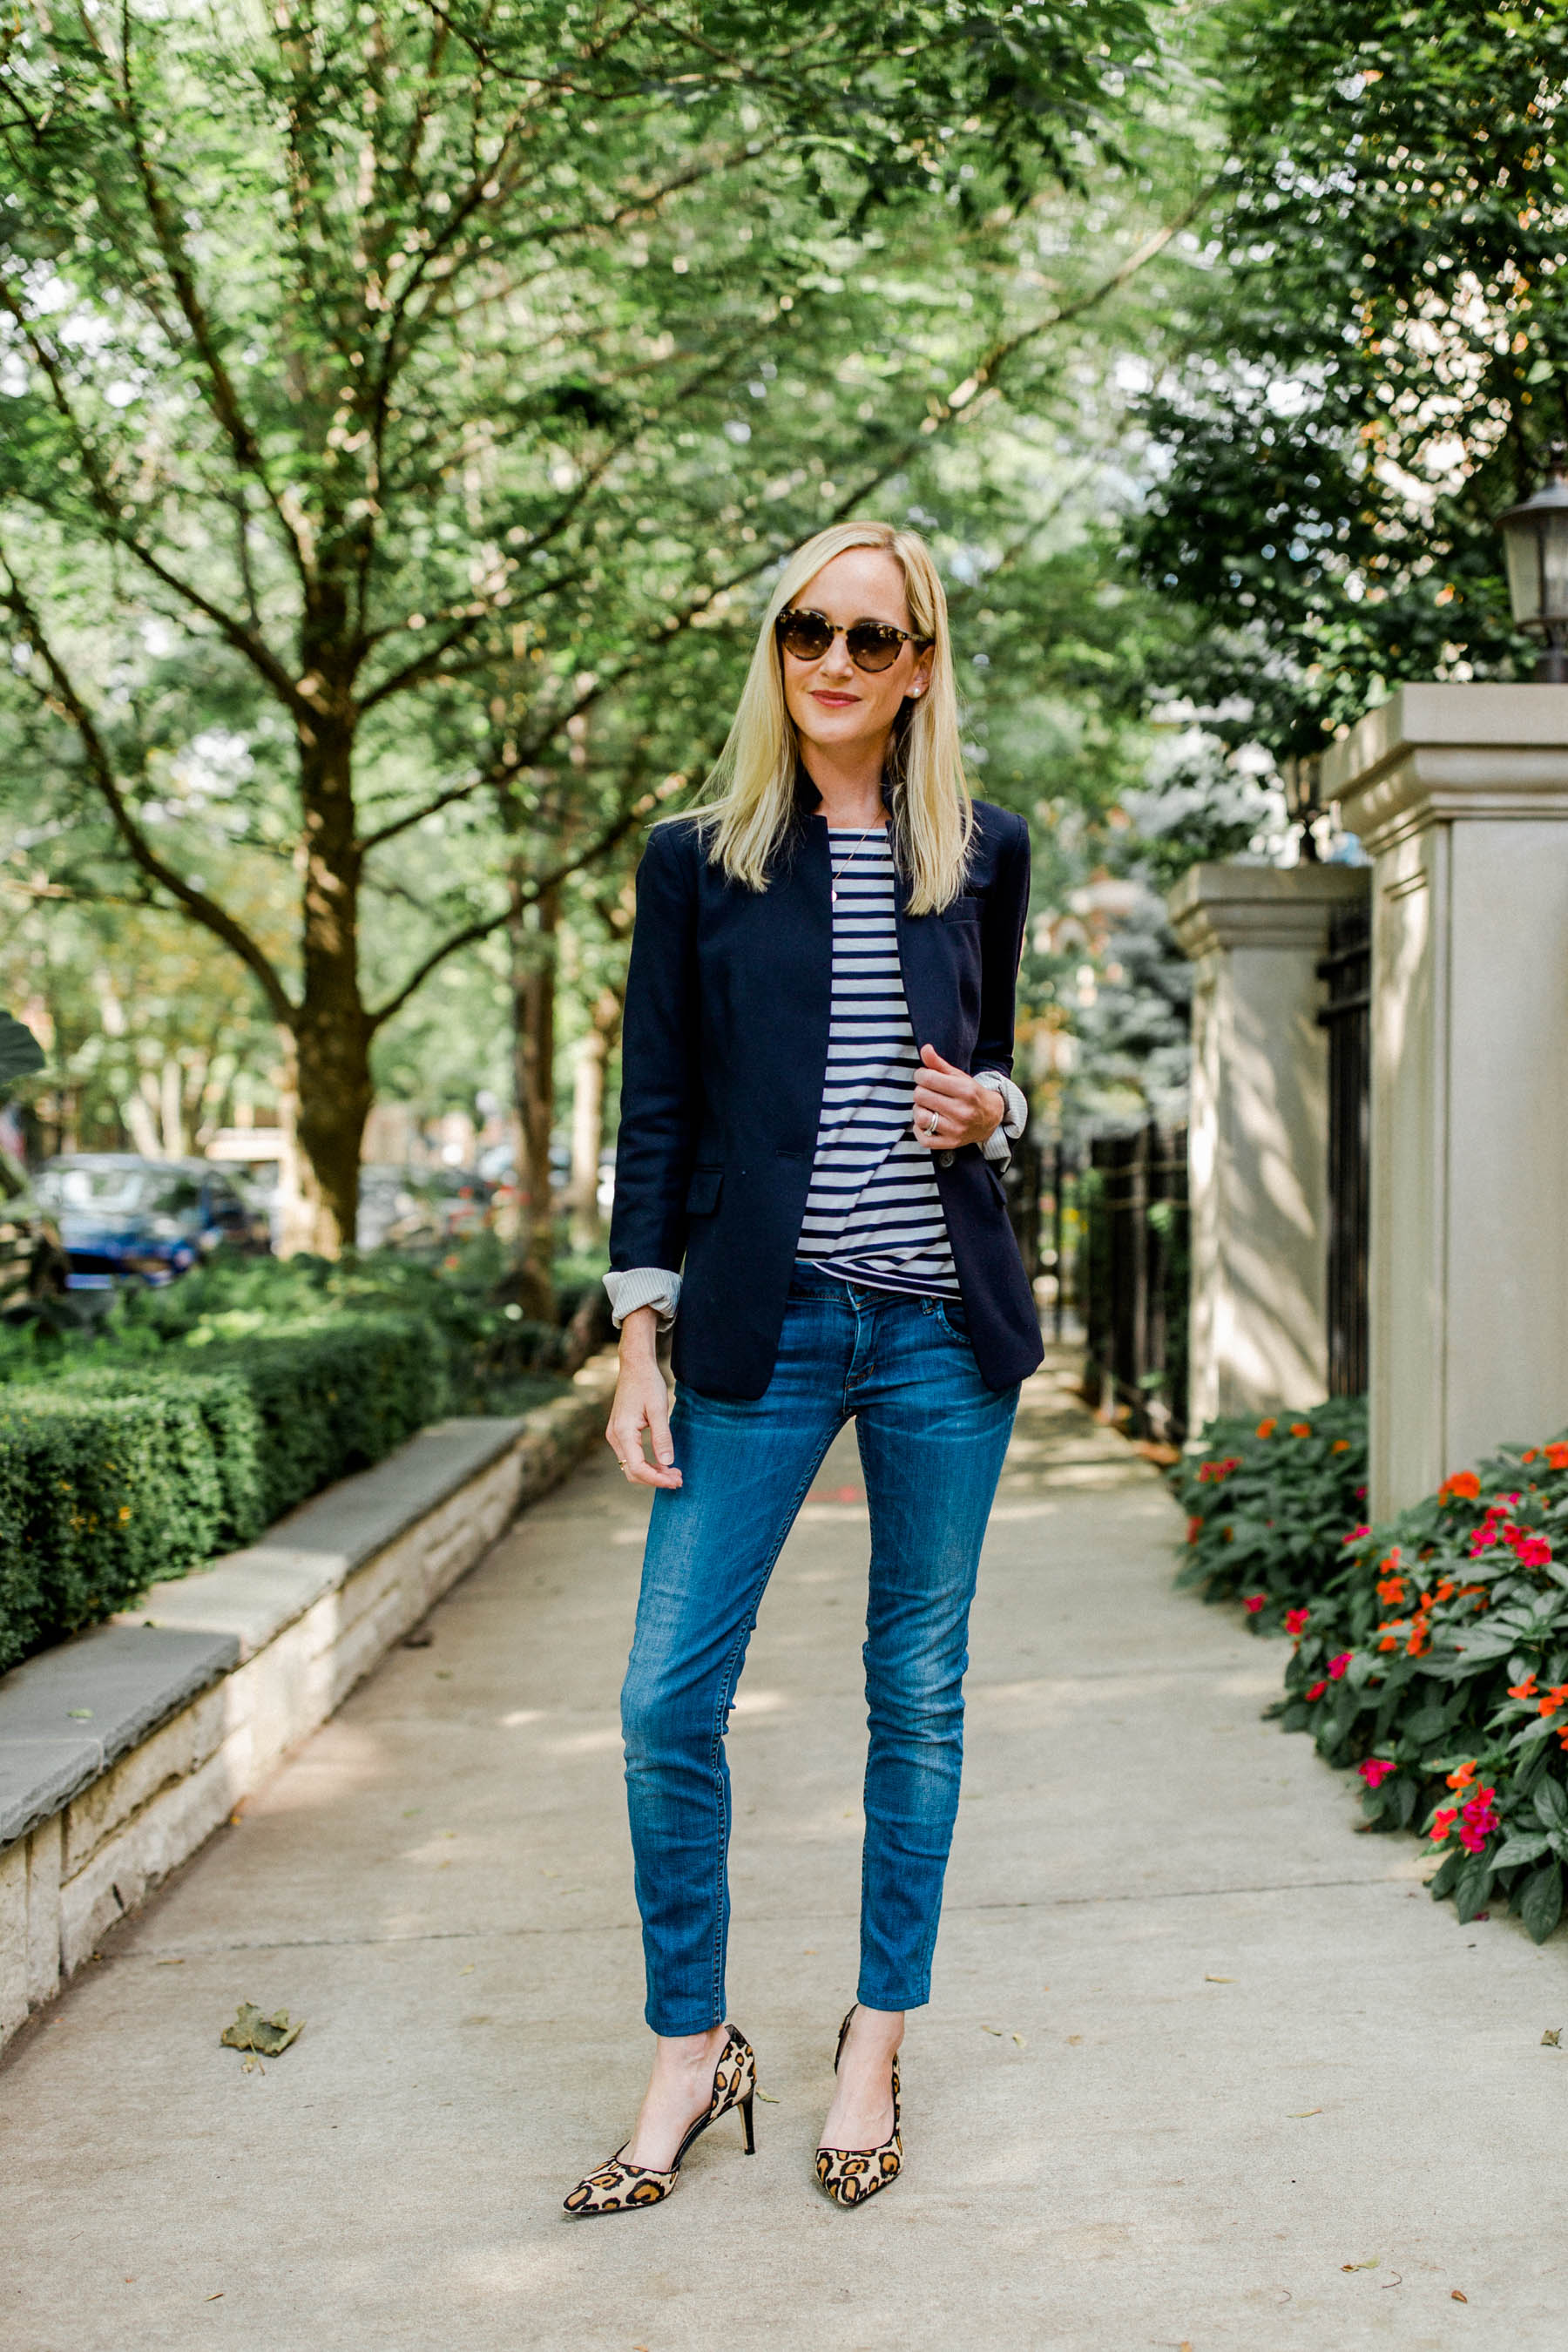 10 Great Pairs of Skinny Jeans - The Best Denim For Preppy Style